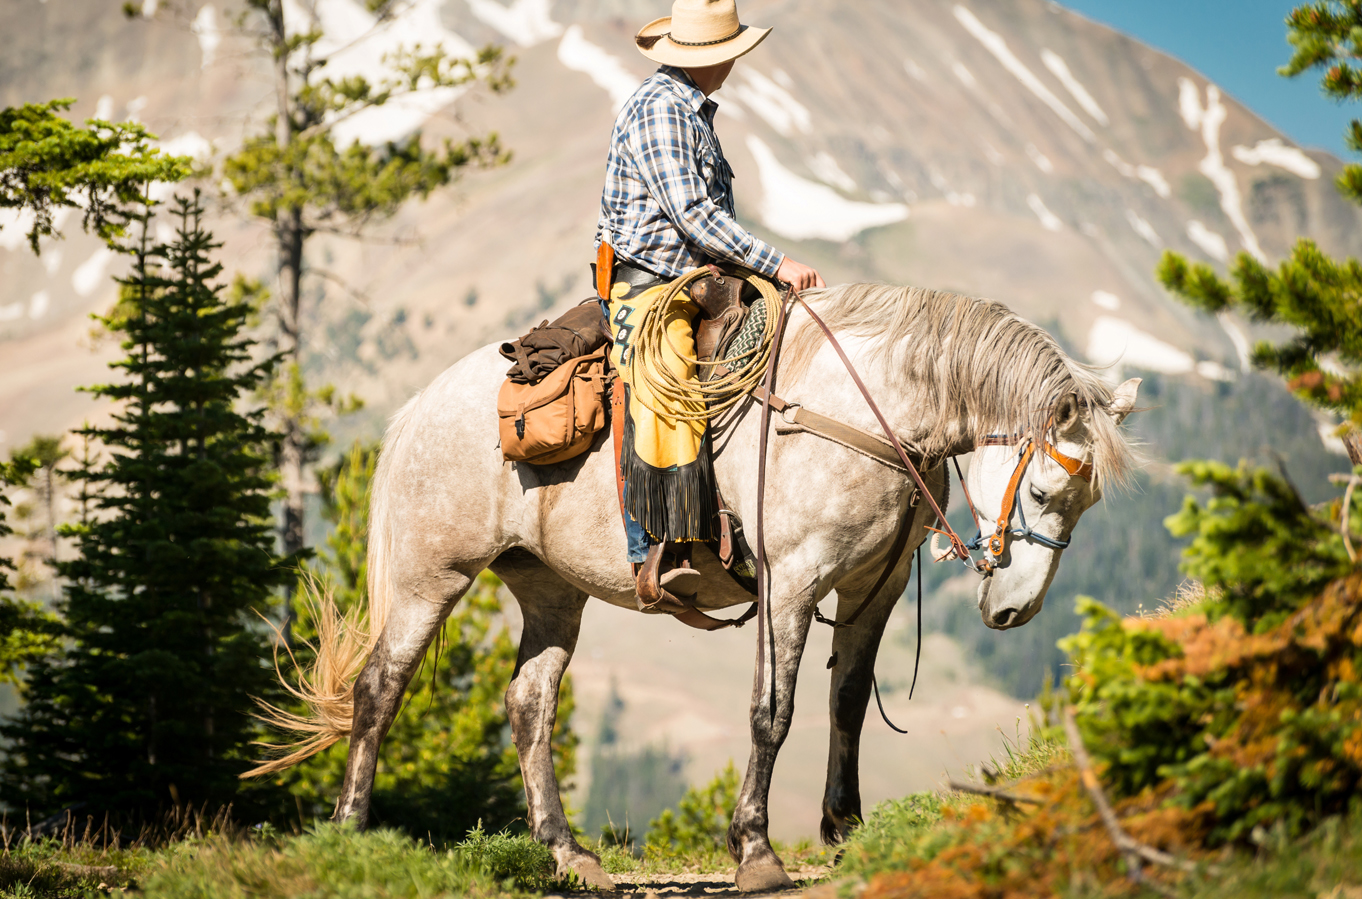 Top 8 Reasons to Take Your Family to a Guest Ranch for the Holidays Did you know that Guest Ranches offer similar amenities and benefits to all-inclusive resorts and hotels? Whether your family is looking for a working dude ranch, luxury ranch, or spending the holidays at a Guest Ranch, there is likely a ranch that fits your needs. As the holiday season approaches, many families are looking for different and unique ways to spend time with their loved ones. Here are the top 8 reasons to take your family to a Guest Ranch this holiday season.